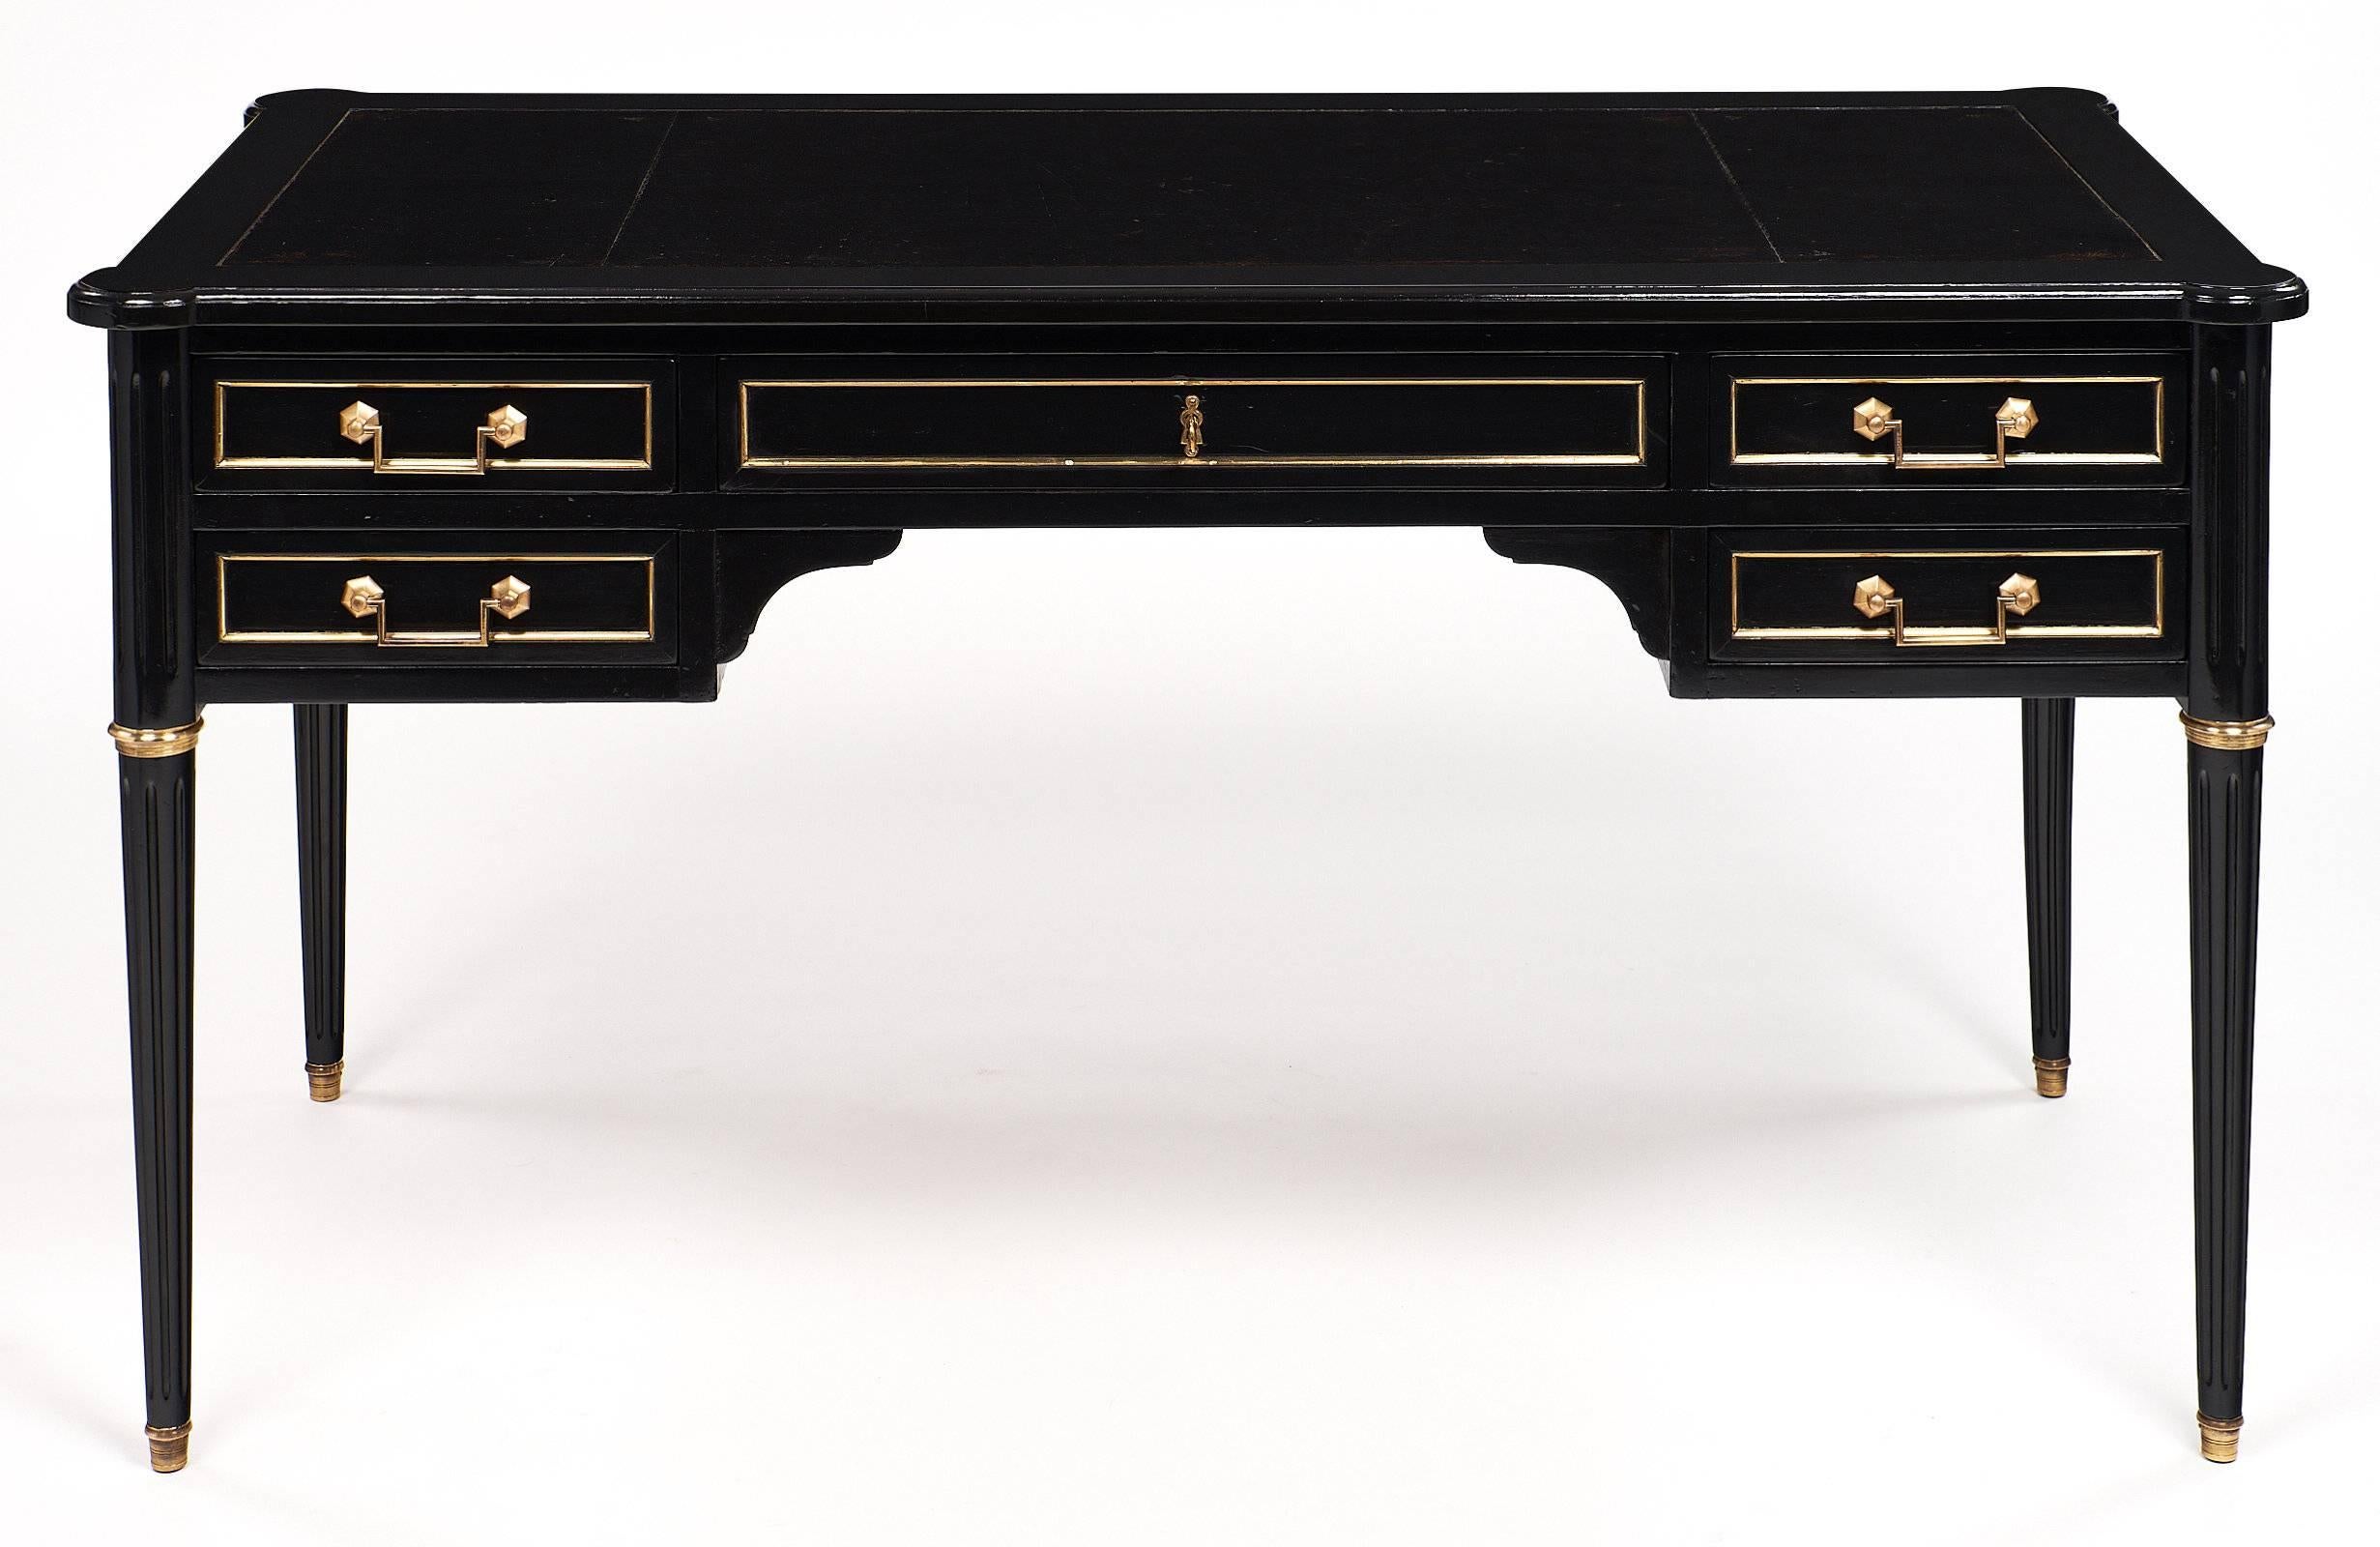 Great Louis XVI style desk with impressive size and wonderful details. This piece is made of solid mahogany that has been ebonized and finished with a French polish for a museum quality luster. The desk has hand-carved tapered and fluted legs capped